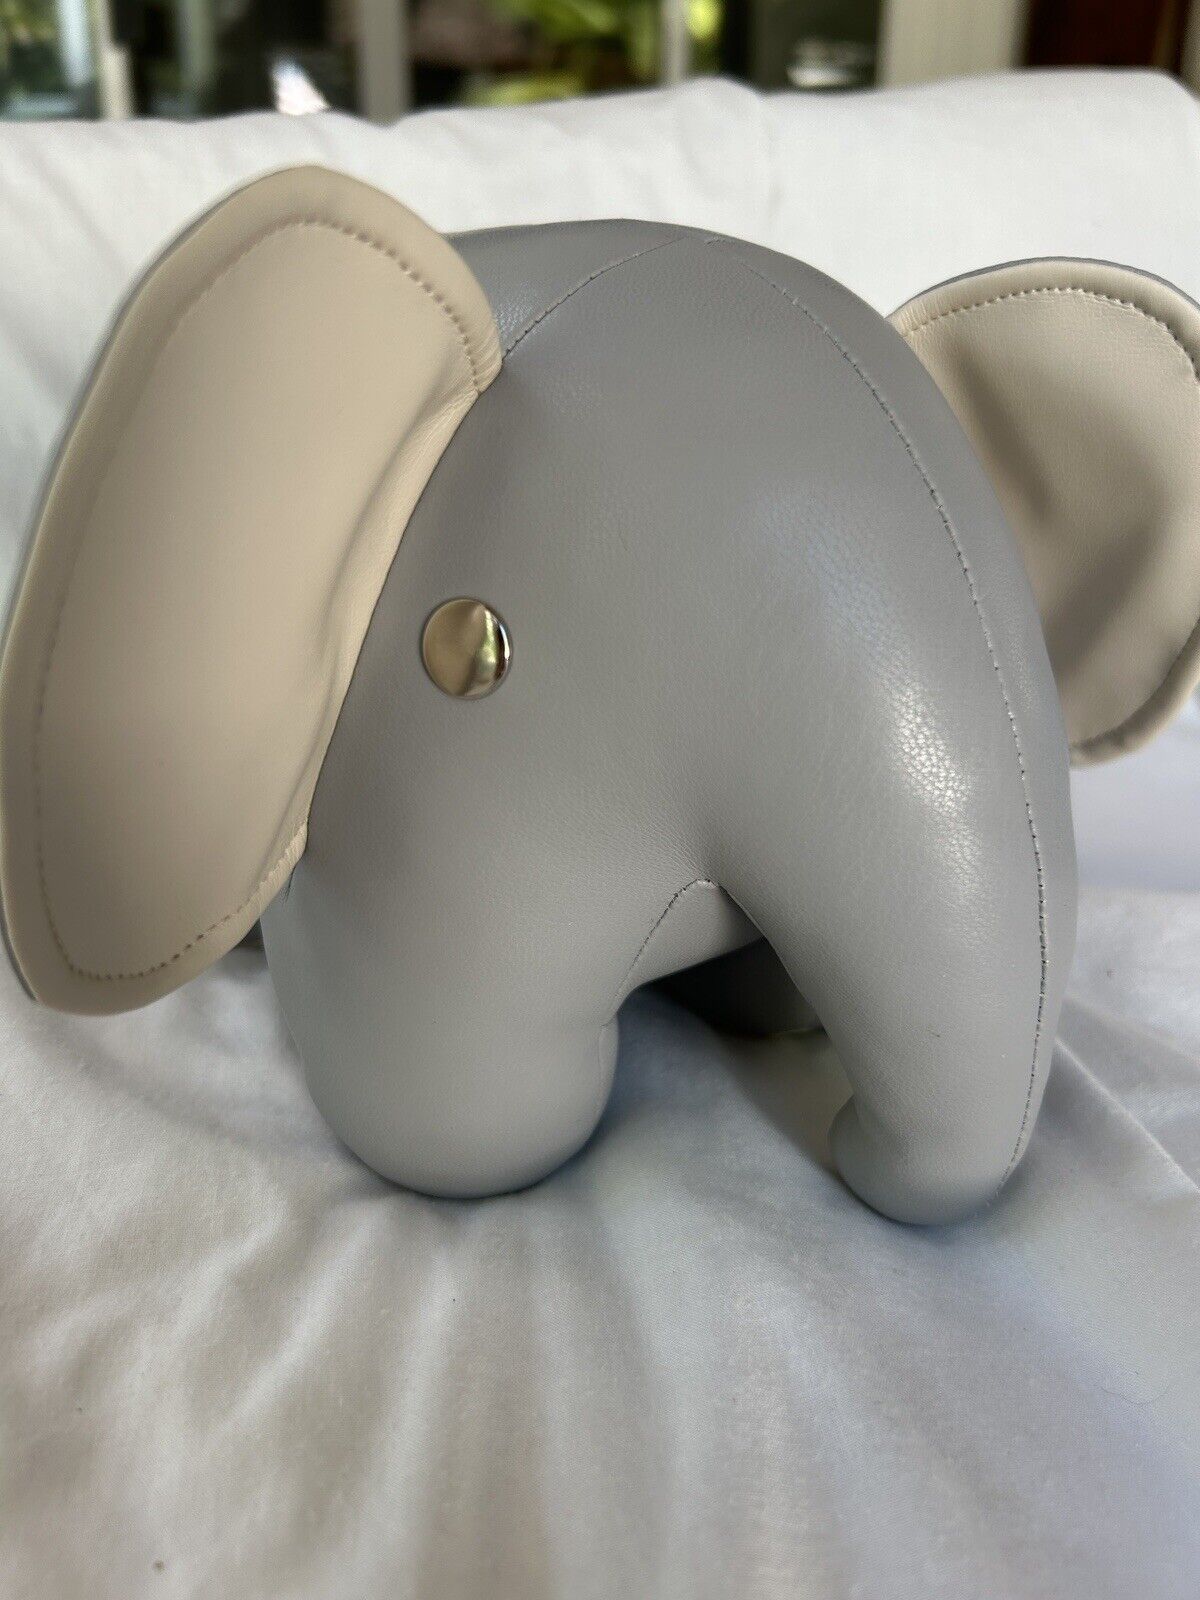 NEW RARE Miffy Dick Bruna Animal Elephant Med Size Plush in Gray Faux Leather